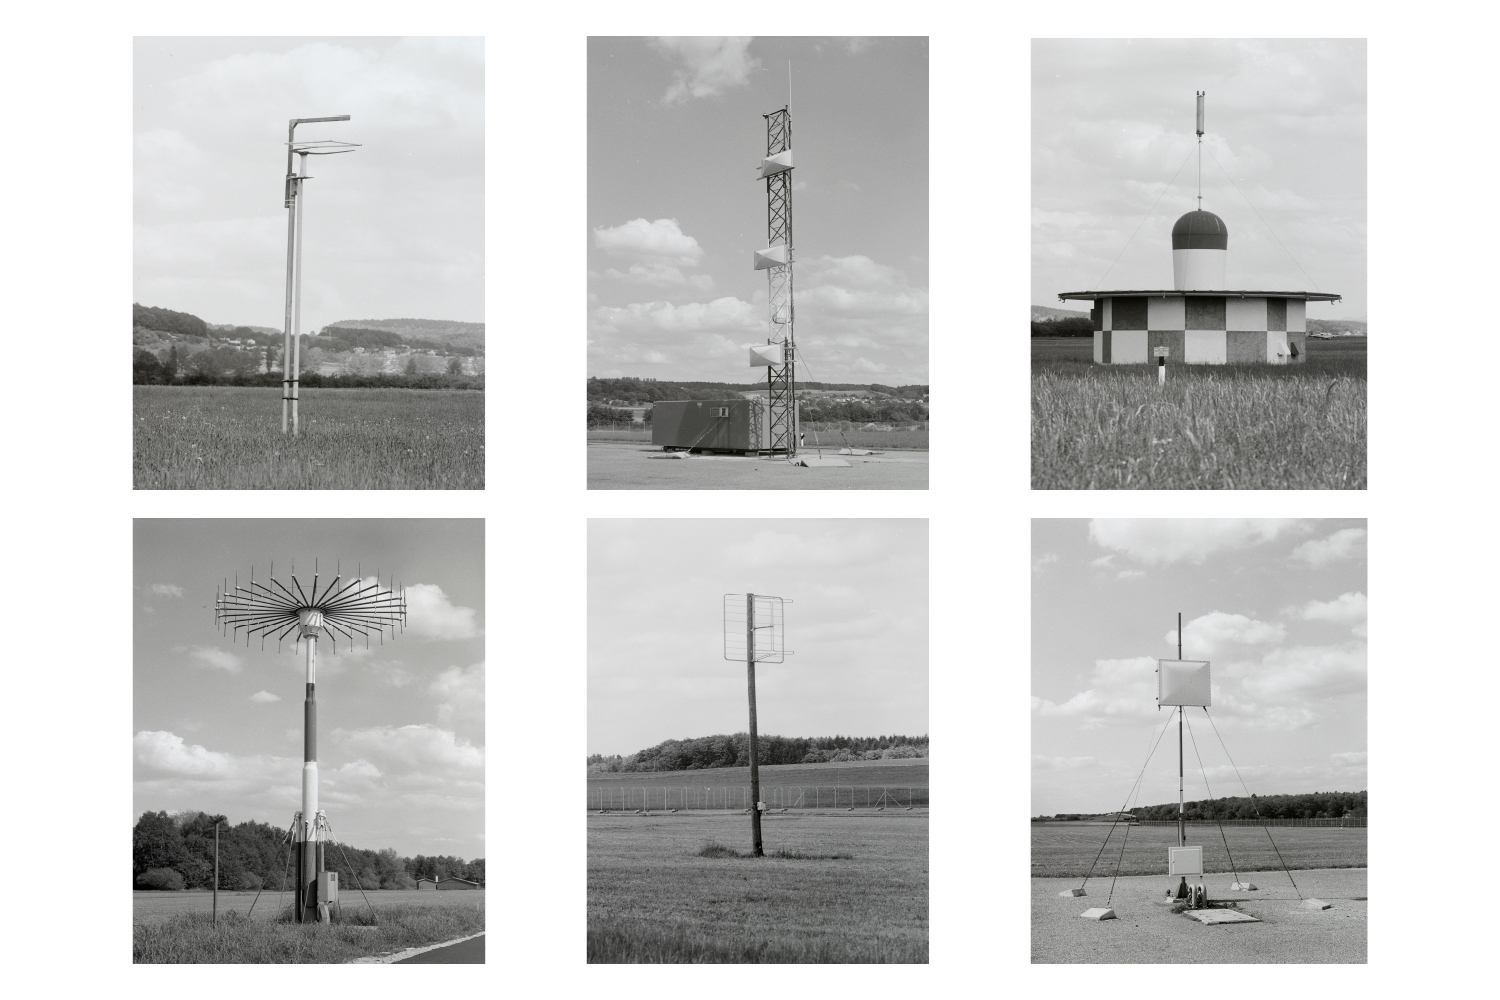 Clockwise from top left:
                              
                              Exterior facility Radio Schweiz: surveillance antenna for radio navigation, 1979.  
                              
                              Antenna of the glide path ground station (Instrument Landing System, 
                              ILS), 1979.
                              
                              VOR (VHF Omnidirectional Range), 1979.
                              
                              Exterior facility Radio Schweiz, 1979. 
                              
                              Surveillance antenna, 1979. 
                              
                              VDF (VHF Direction Finder) for the bearing of airplanes with radio telephony, 1979.